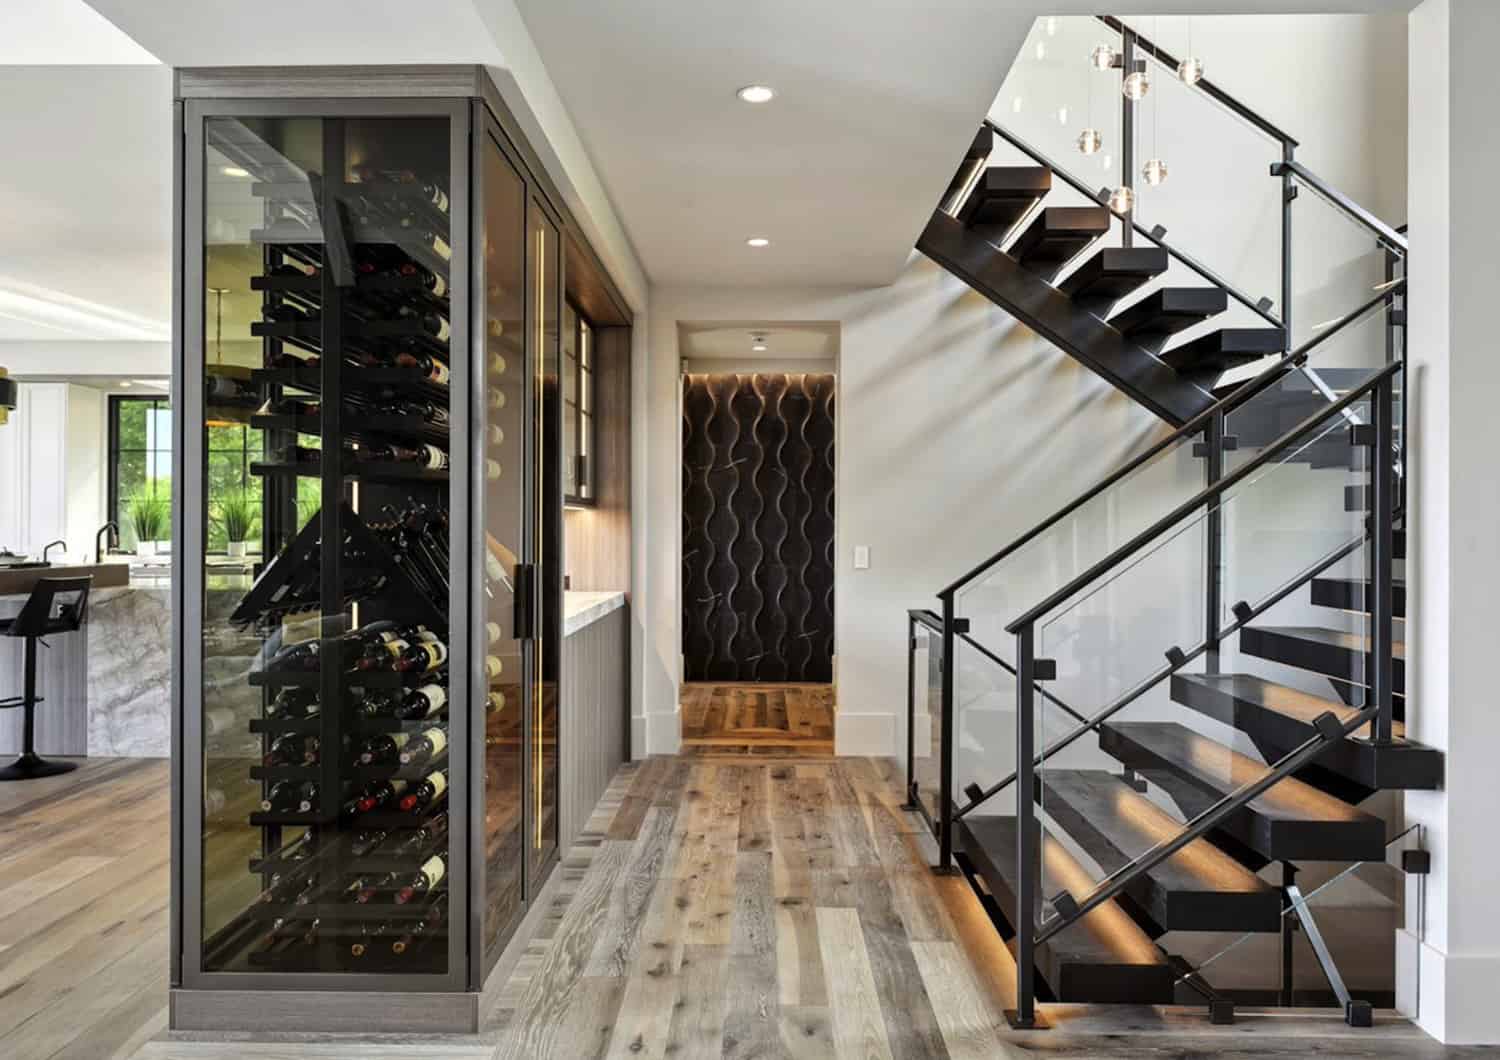 transitional-style-staircase-wine-cellar